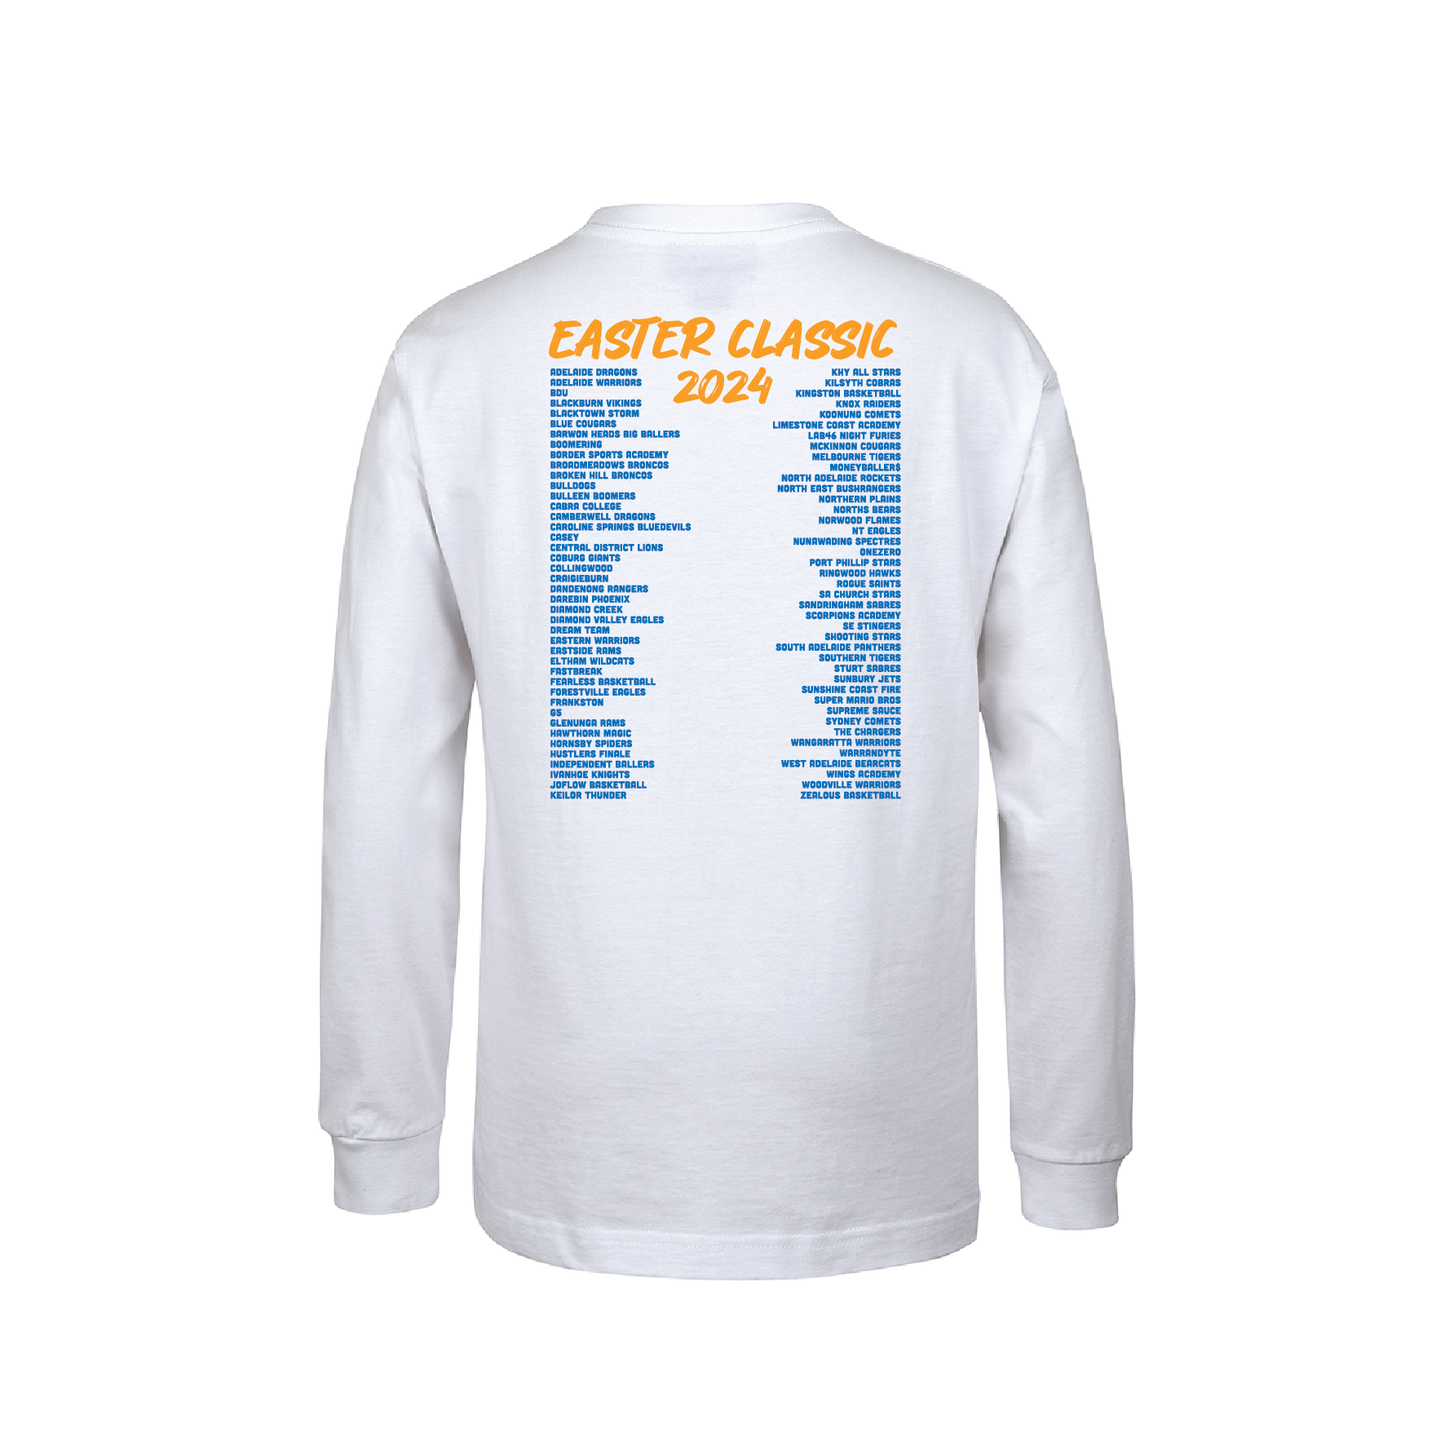 EASTER CLASSIC T-SHIRT WHITE LONG SLEEVE CLUB NAMES ON BACK (available online only)